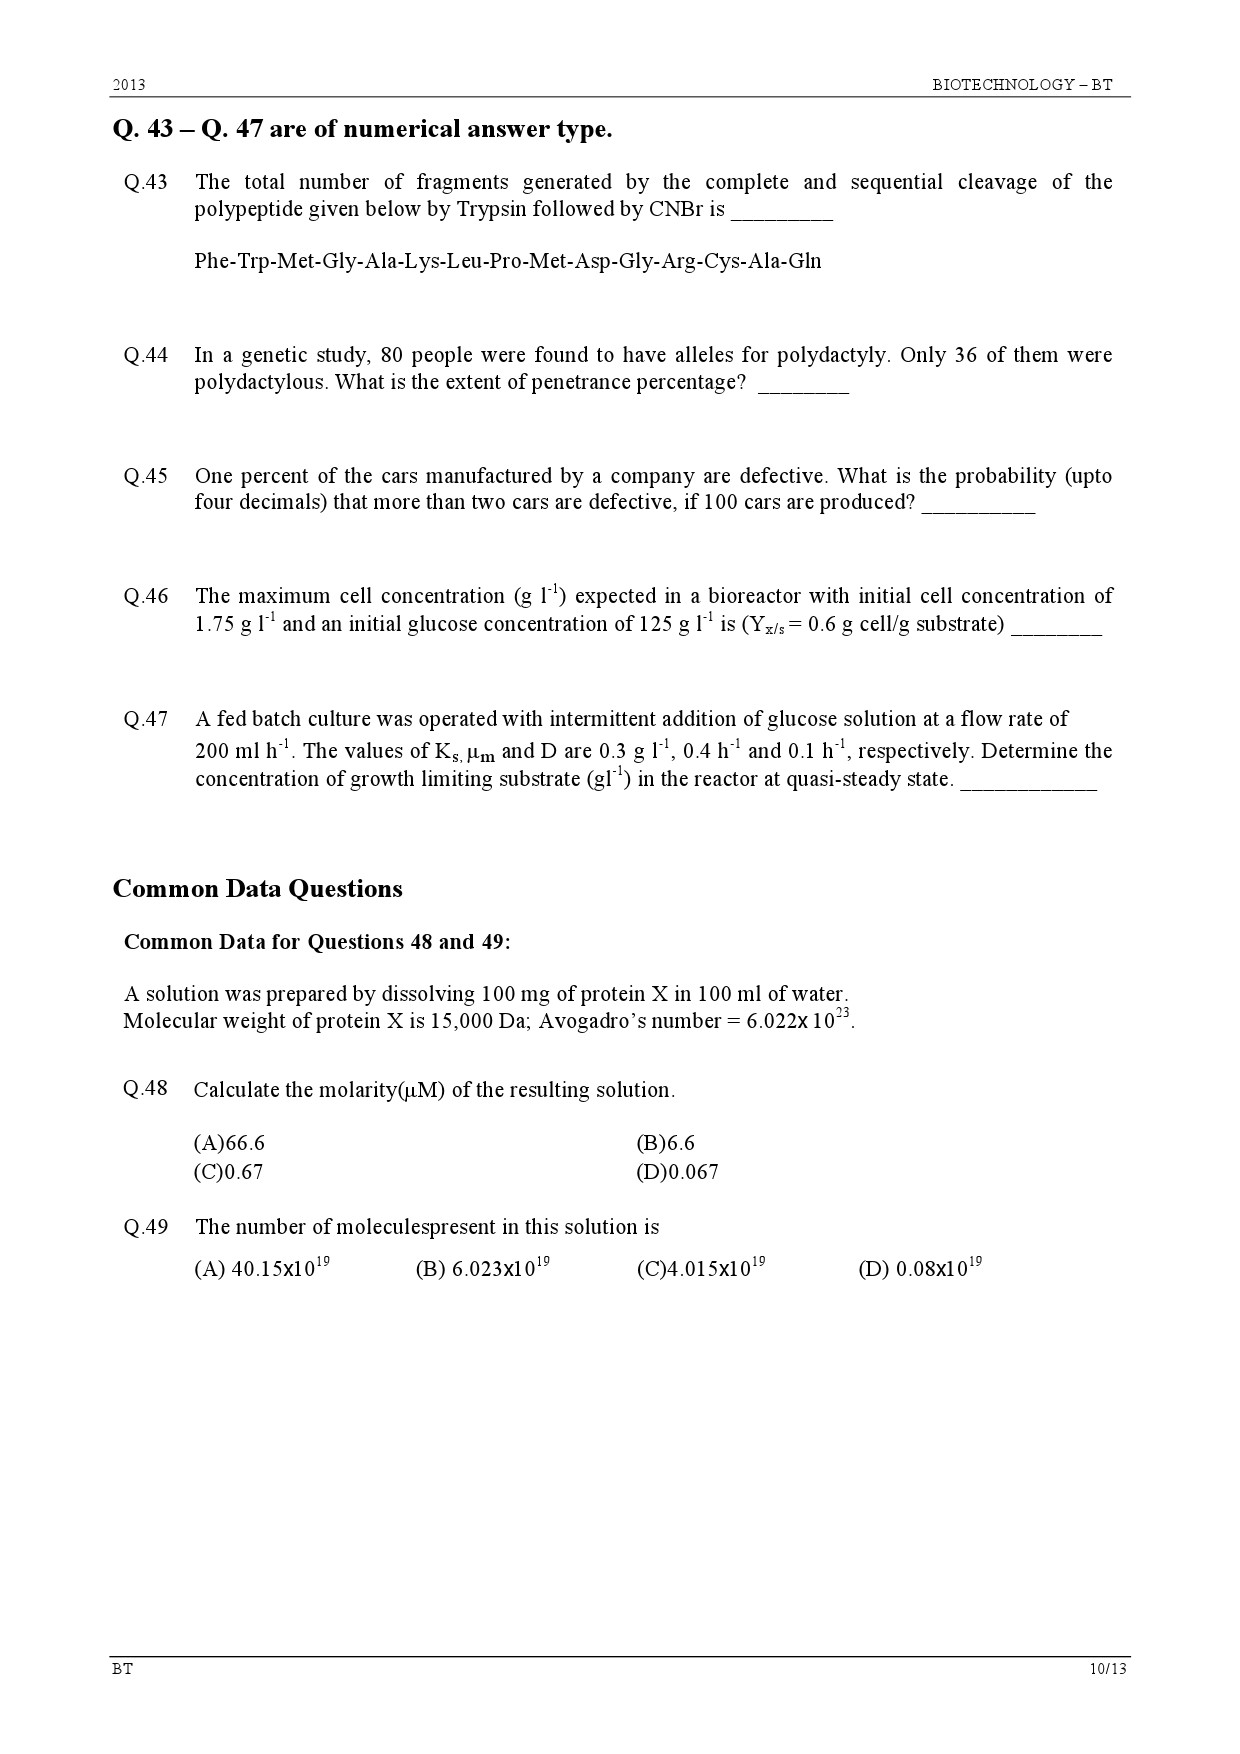 GATE Exam Question Paper 2013 Biotechnology 10